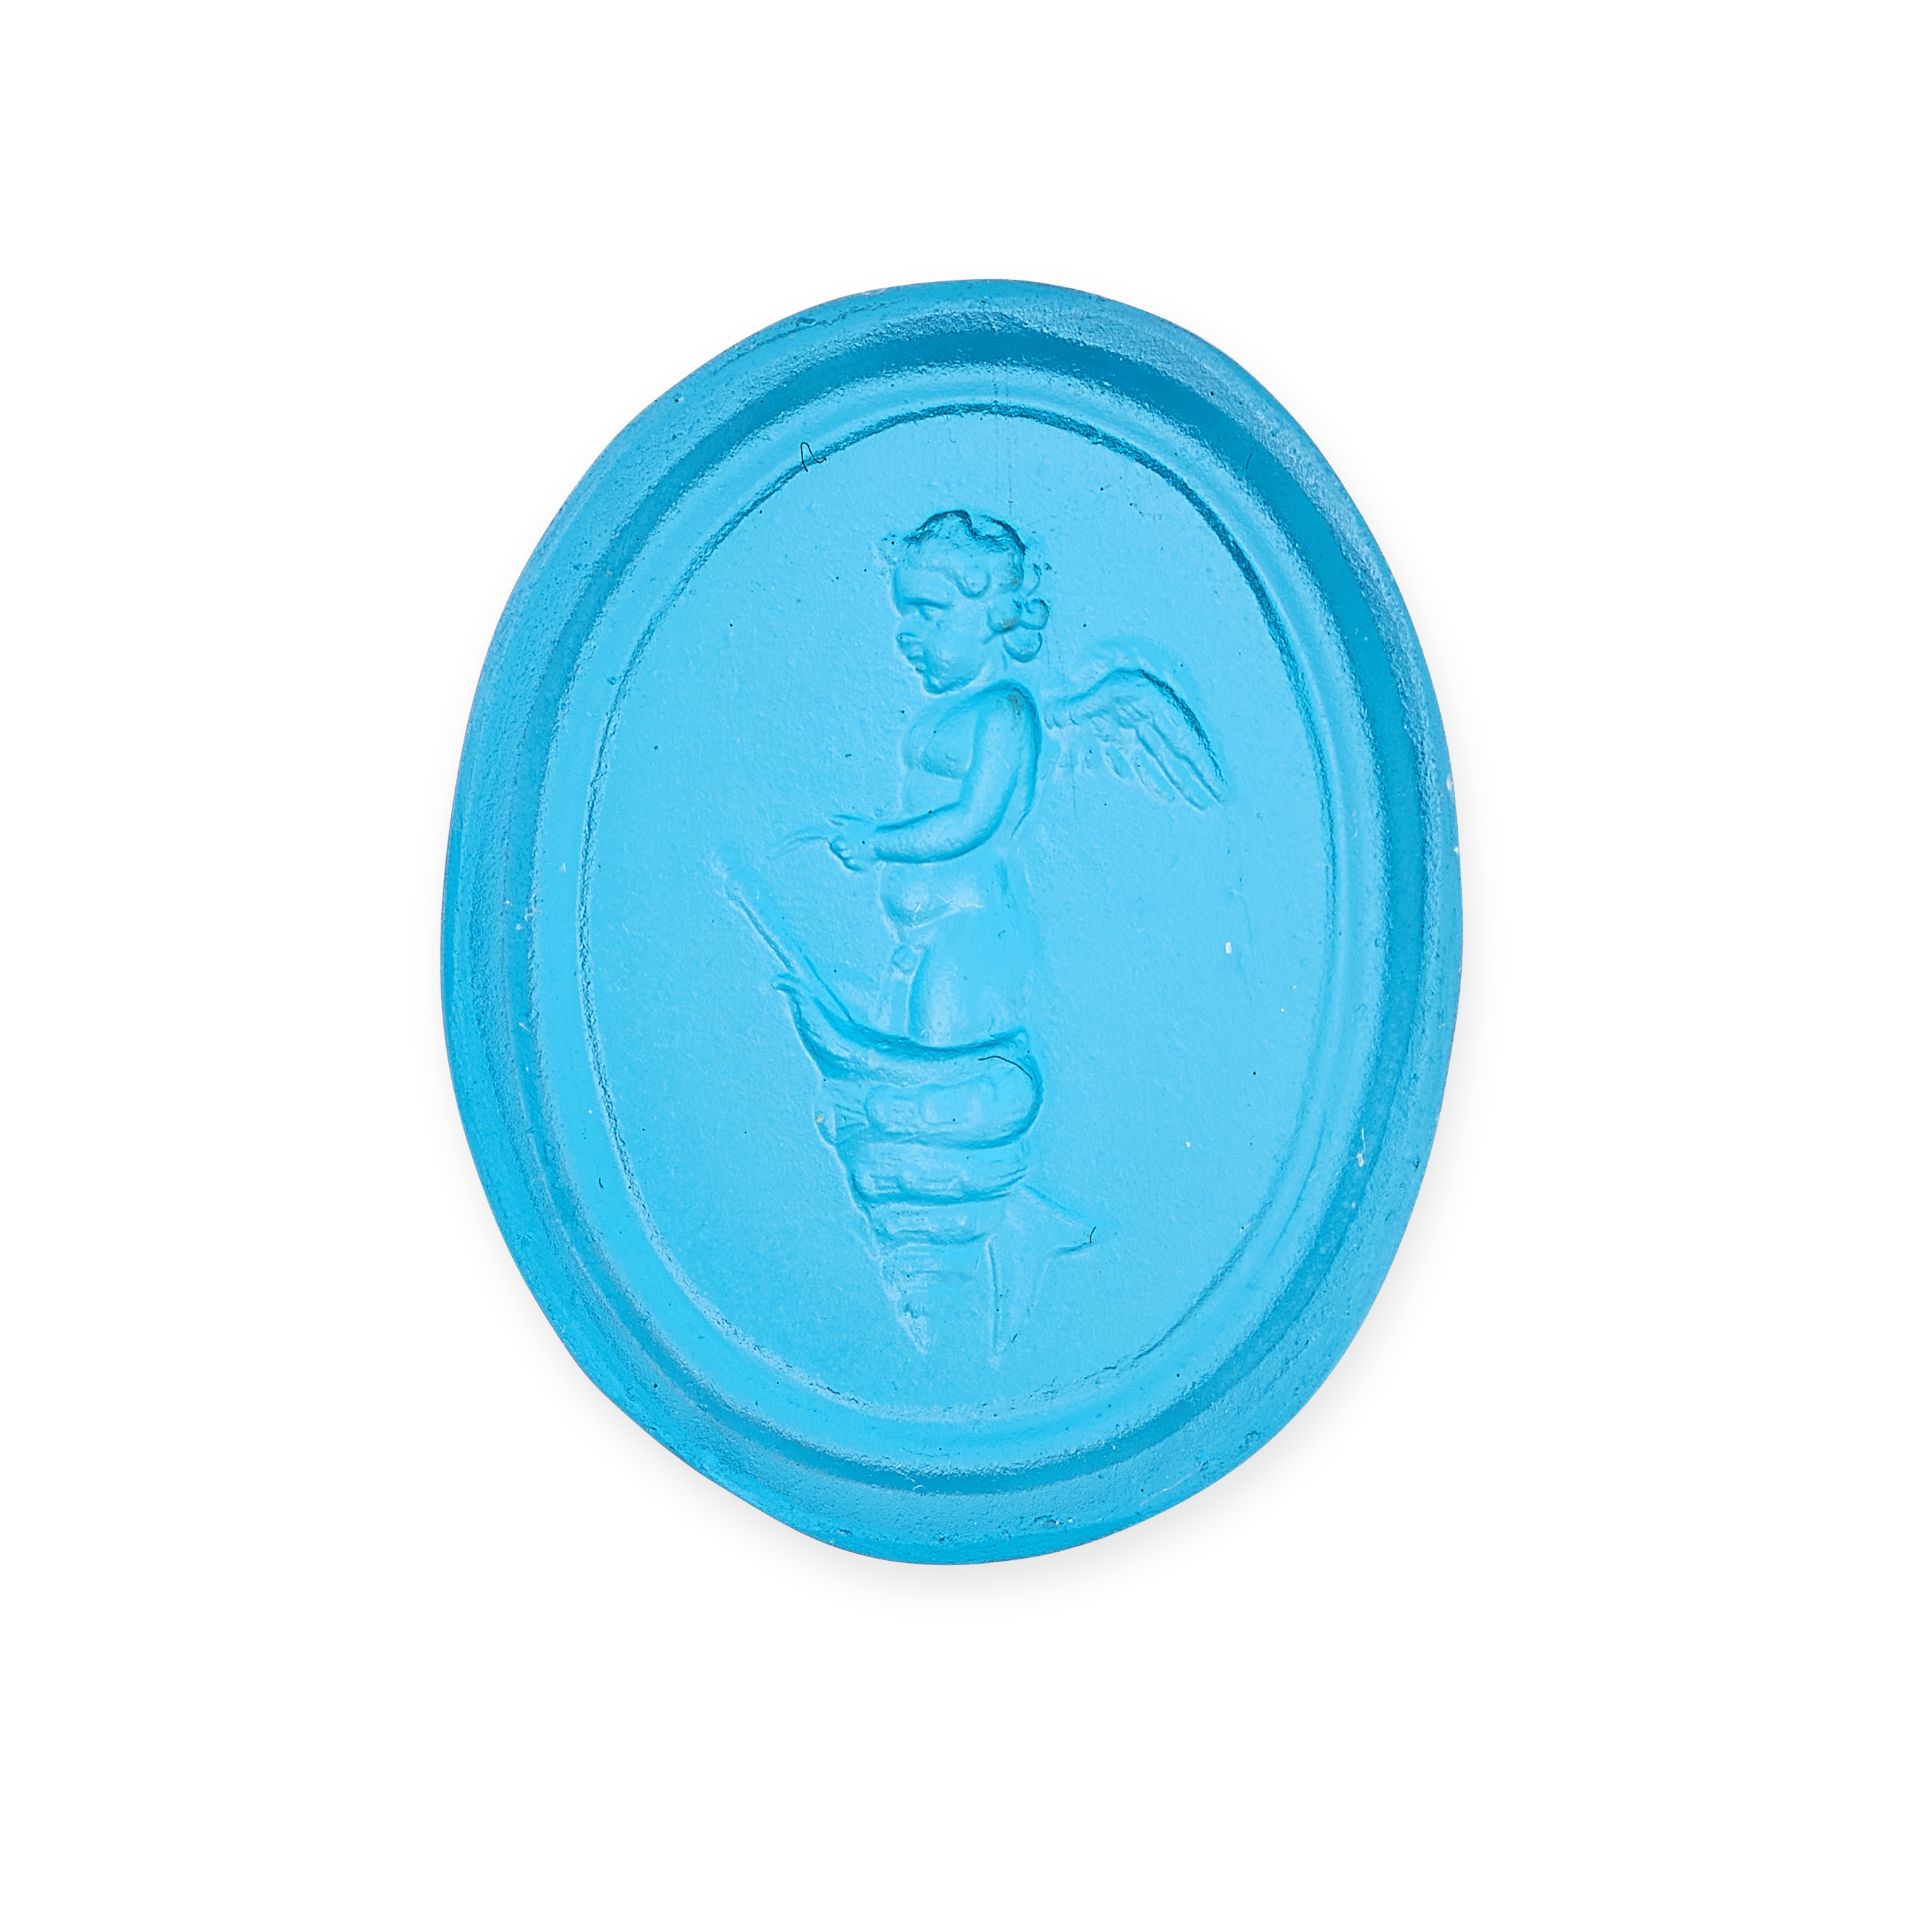 NO RESERVE - A MODERN MOULDED GLASS SEAL cast from an intaglio, the oval moulded blue glass depic...